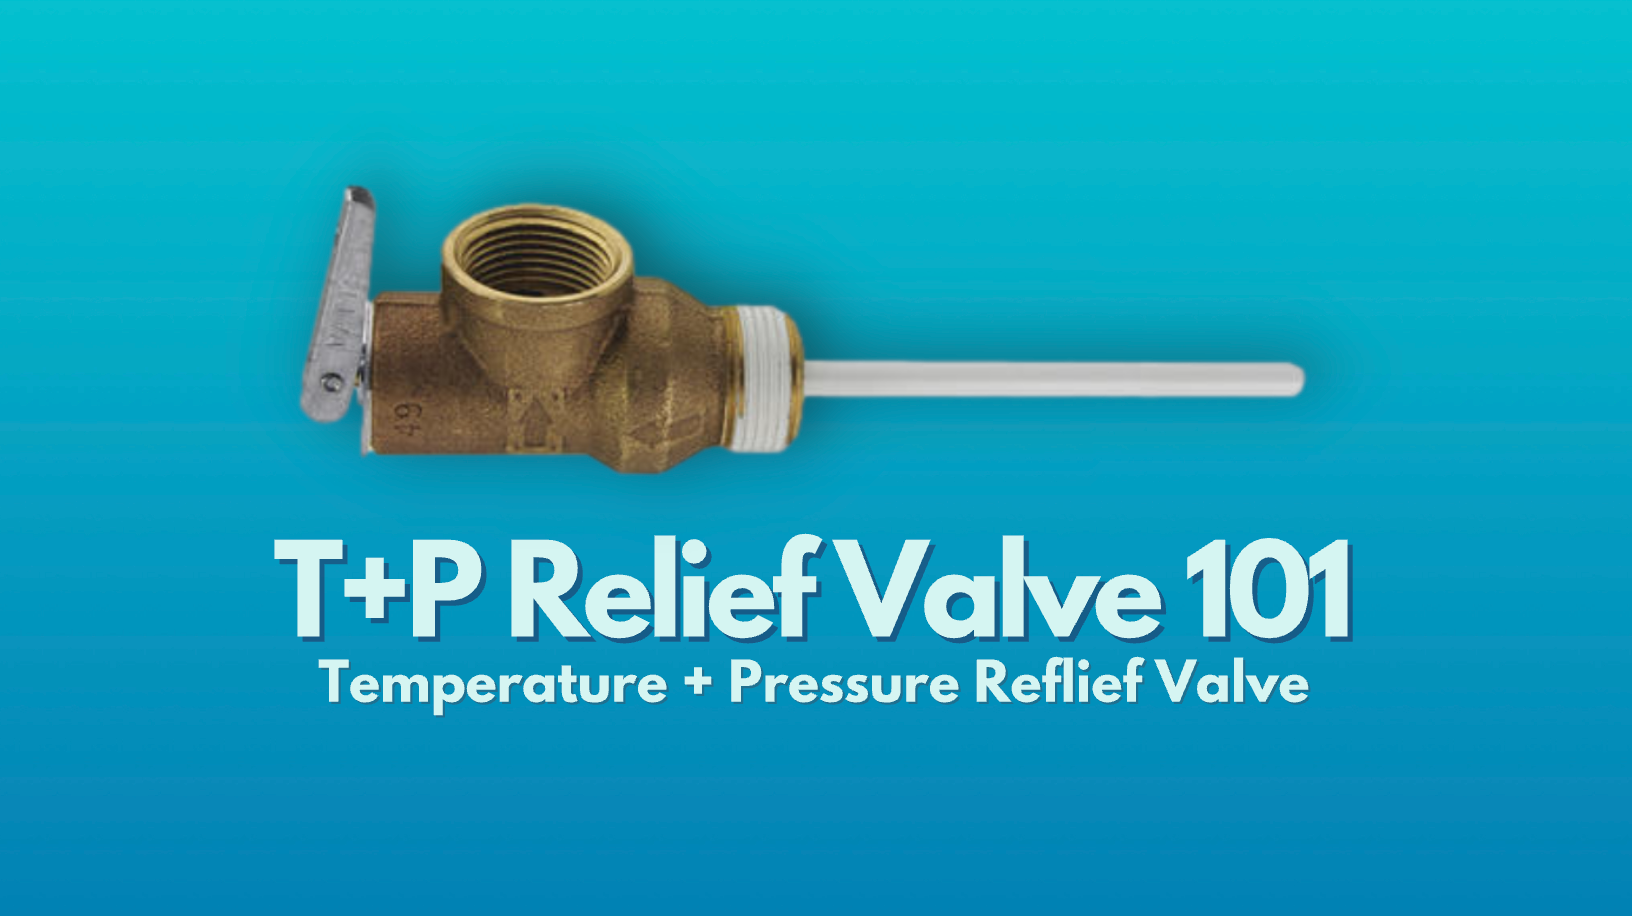 Water Heater T&P Relief Valve on its side above light blue text that reads: 